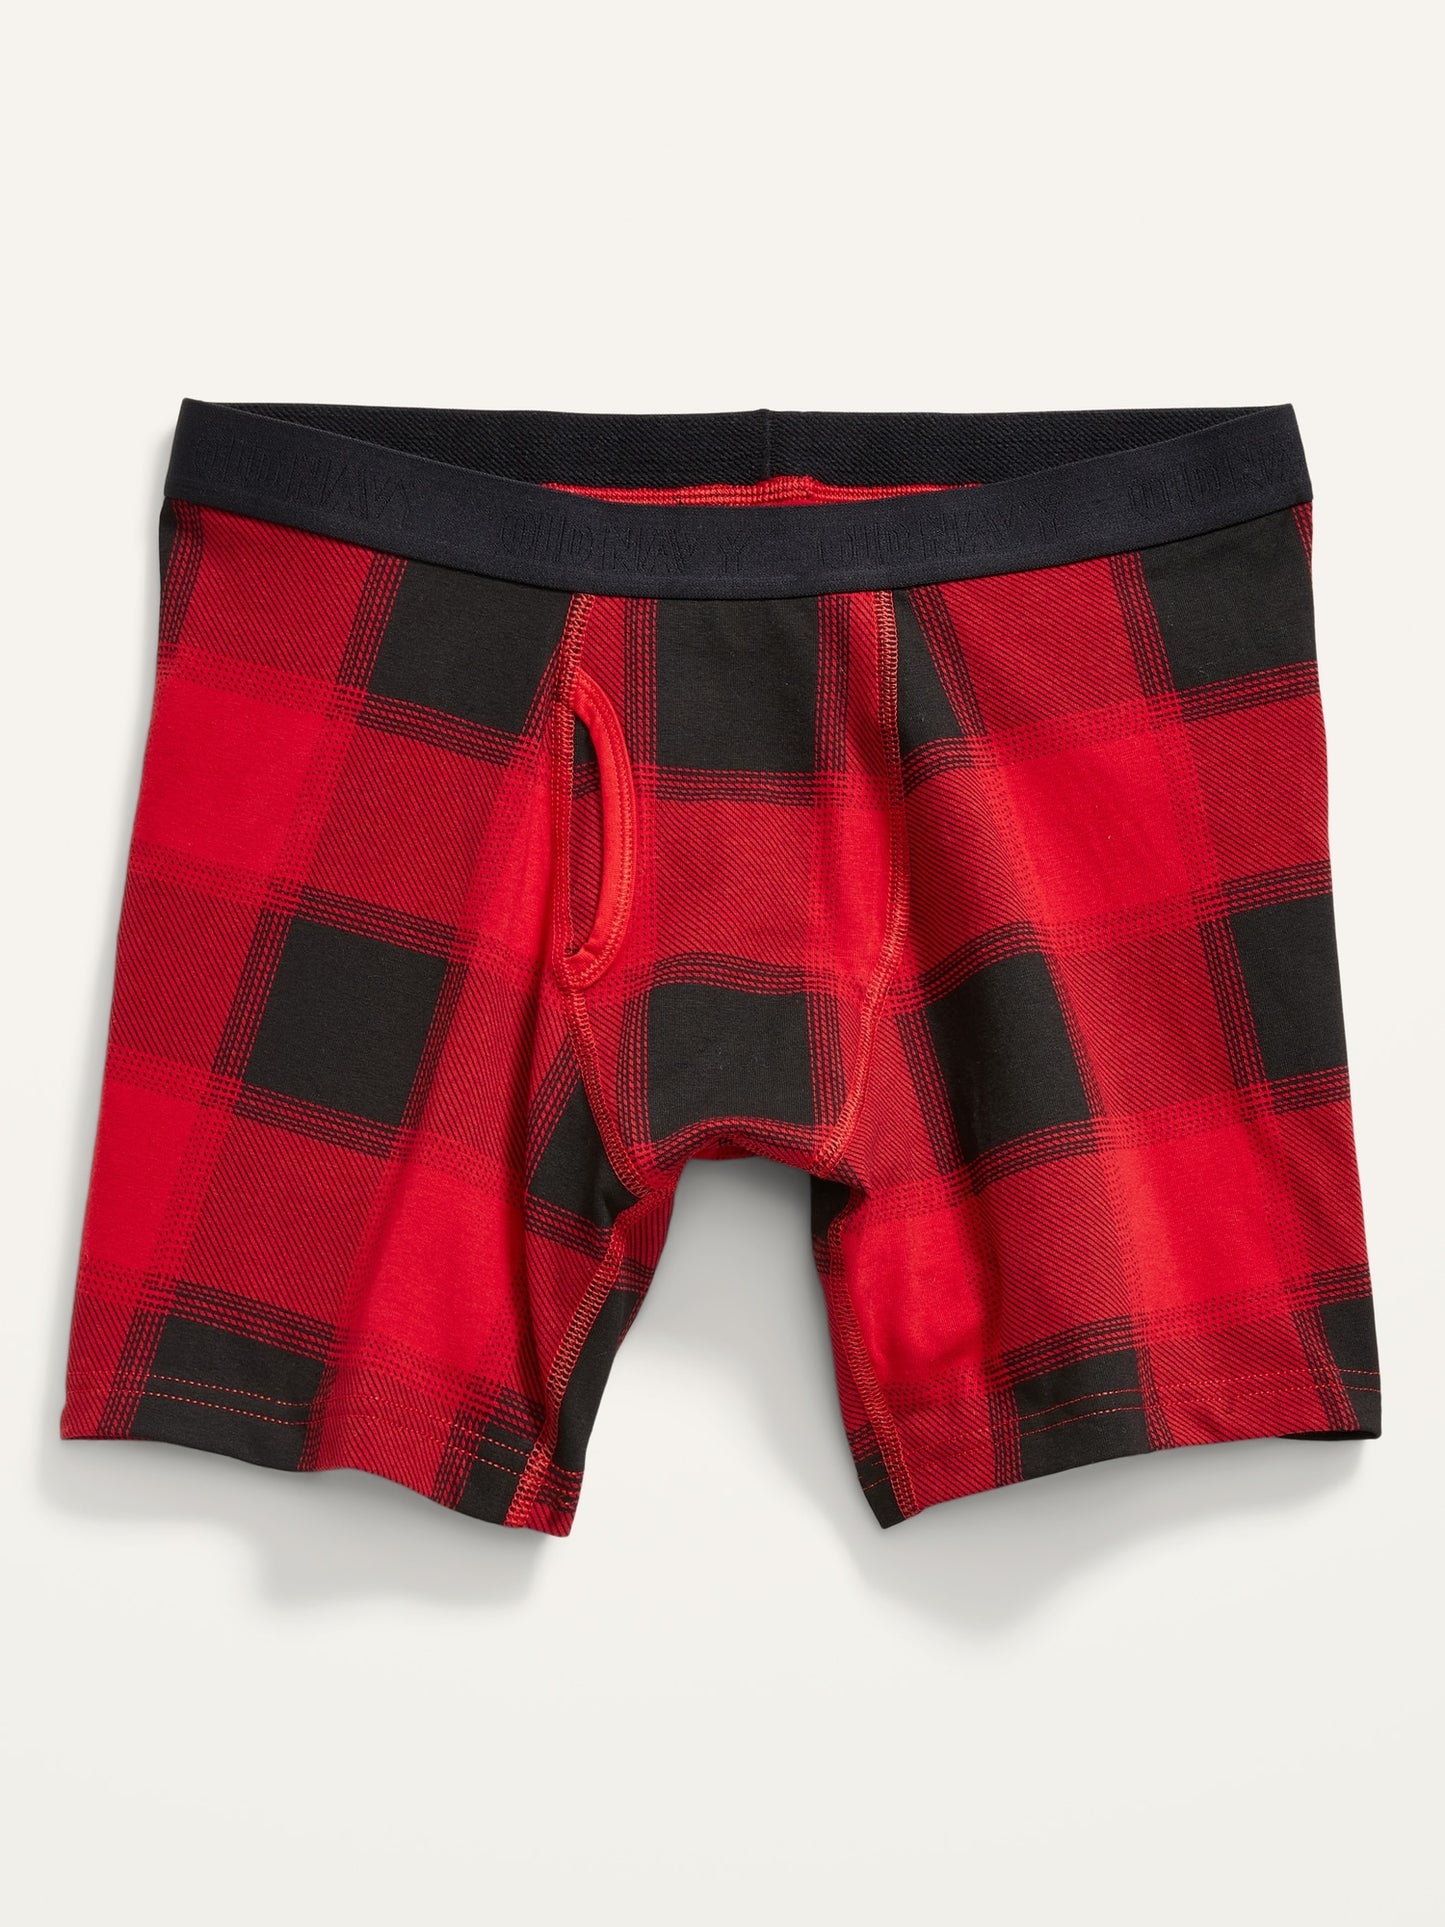 ON Soft-Washed Printed Boxer Brief Underwear For Men - Red Buffalo Plaid